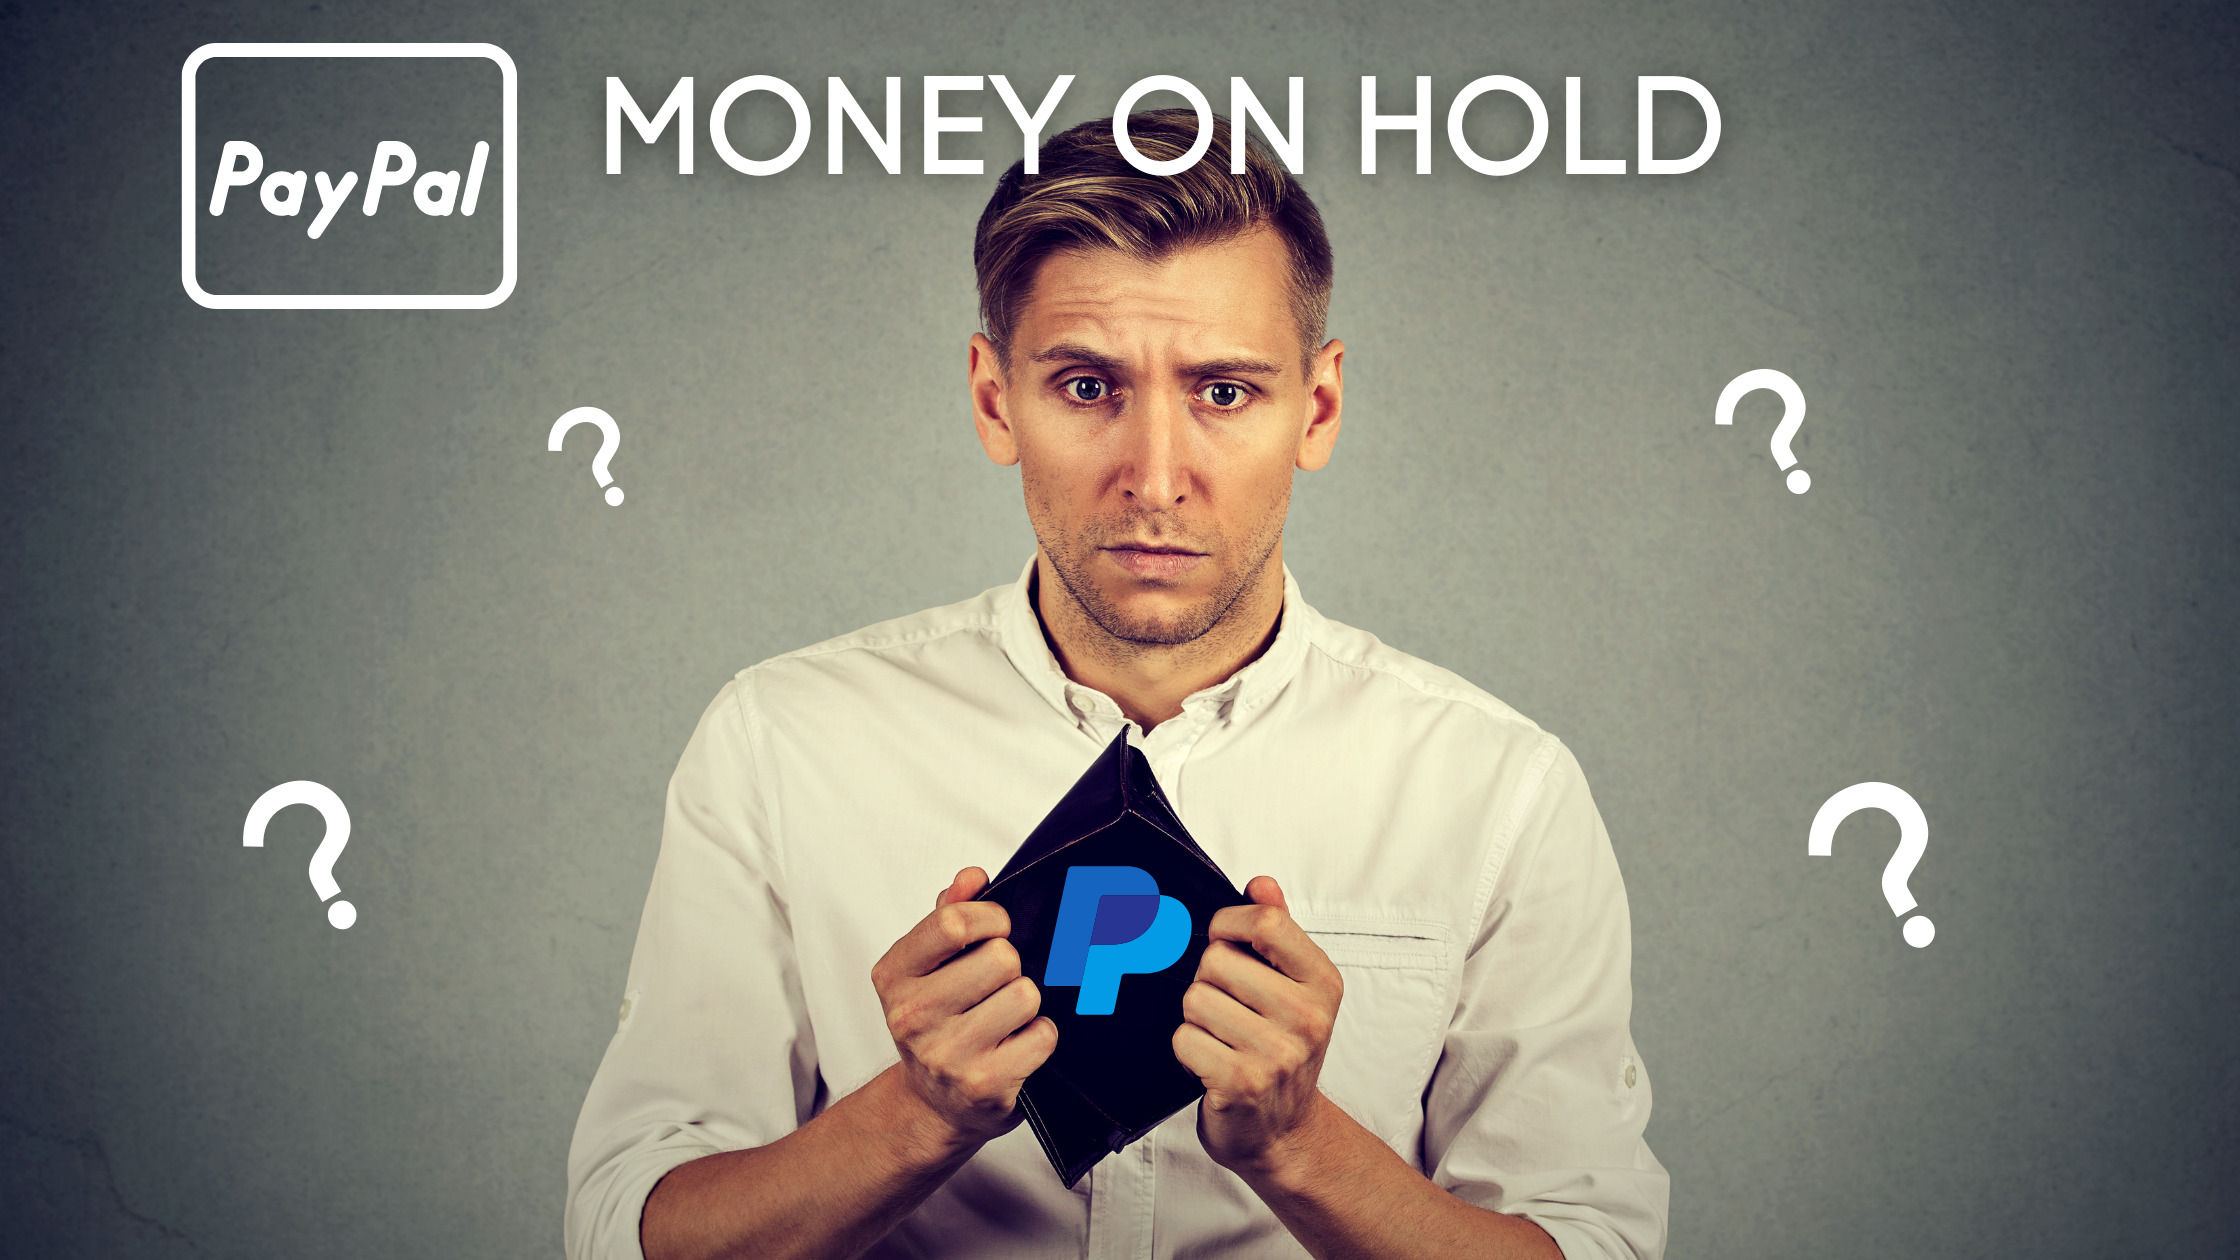 You are currently viewing PayPal reply on – Why my Paypal money on hold?